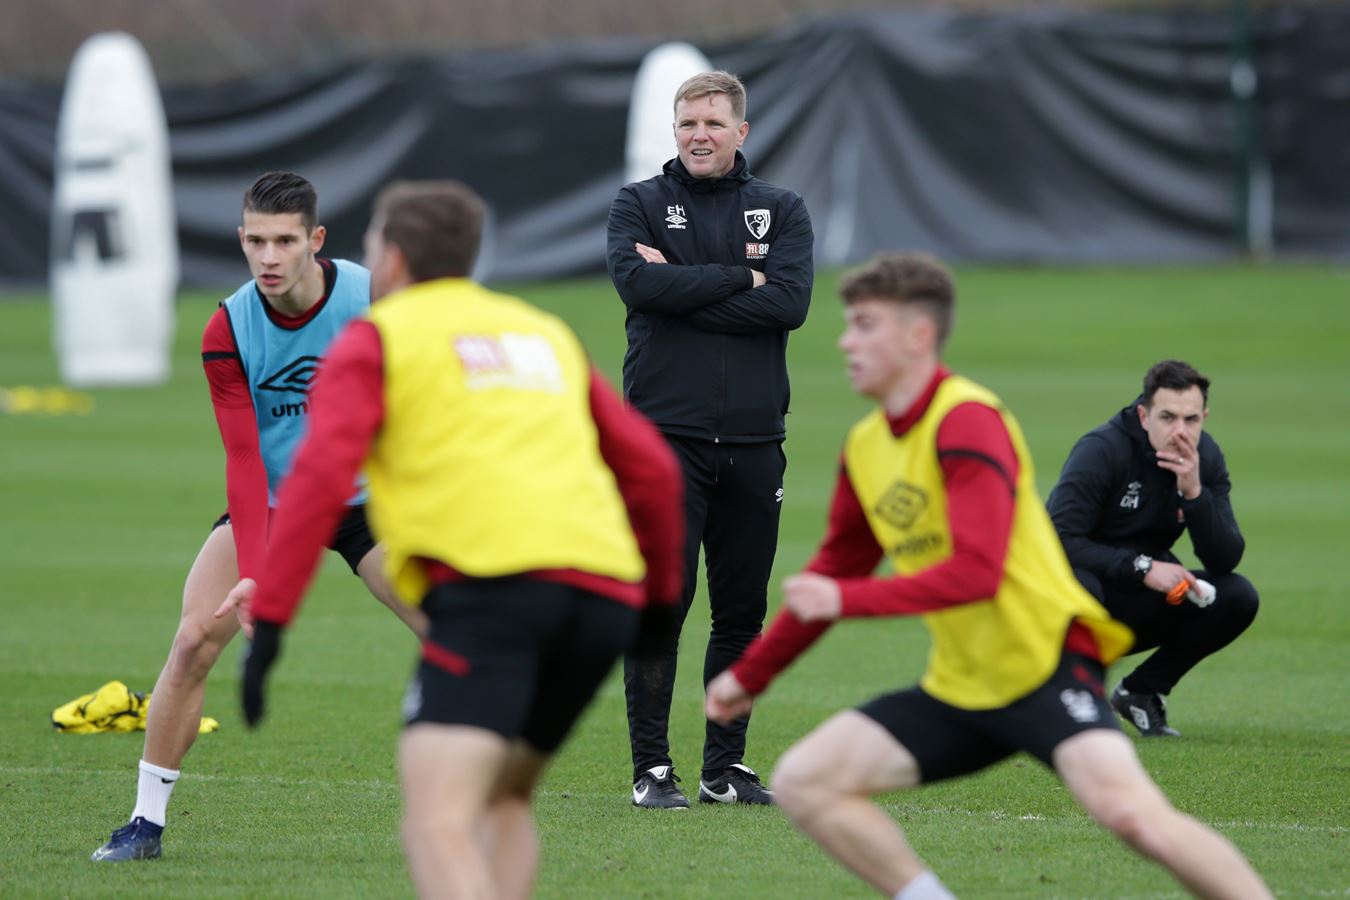 Bournemouth and Eddie Howe need some catharsis before things sour